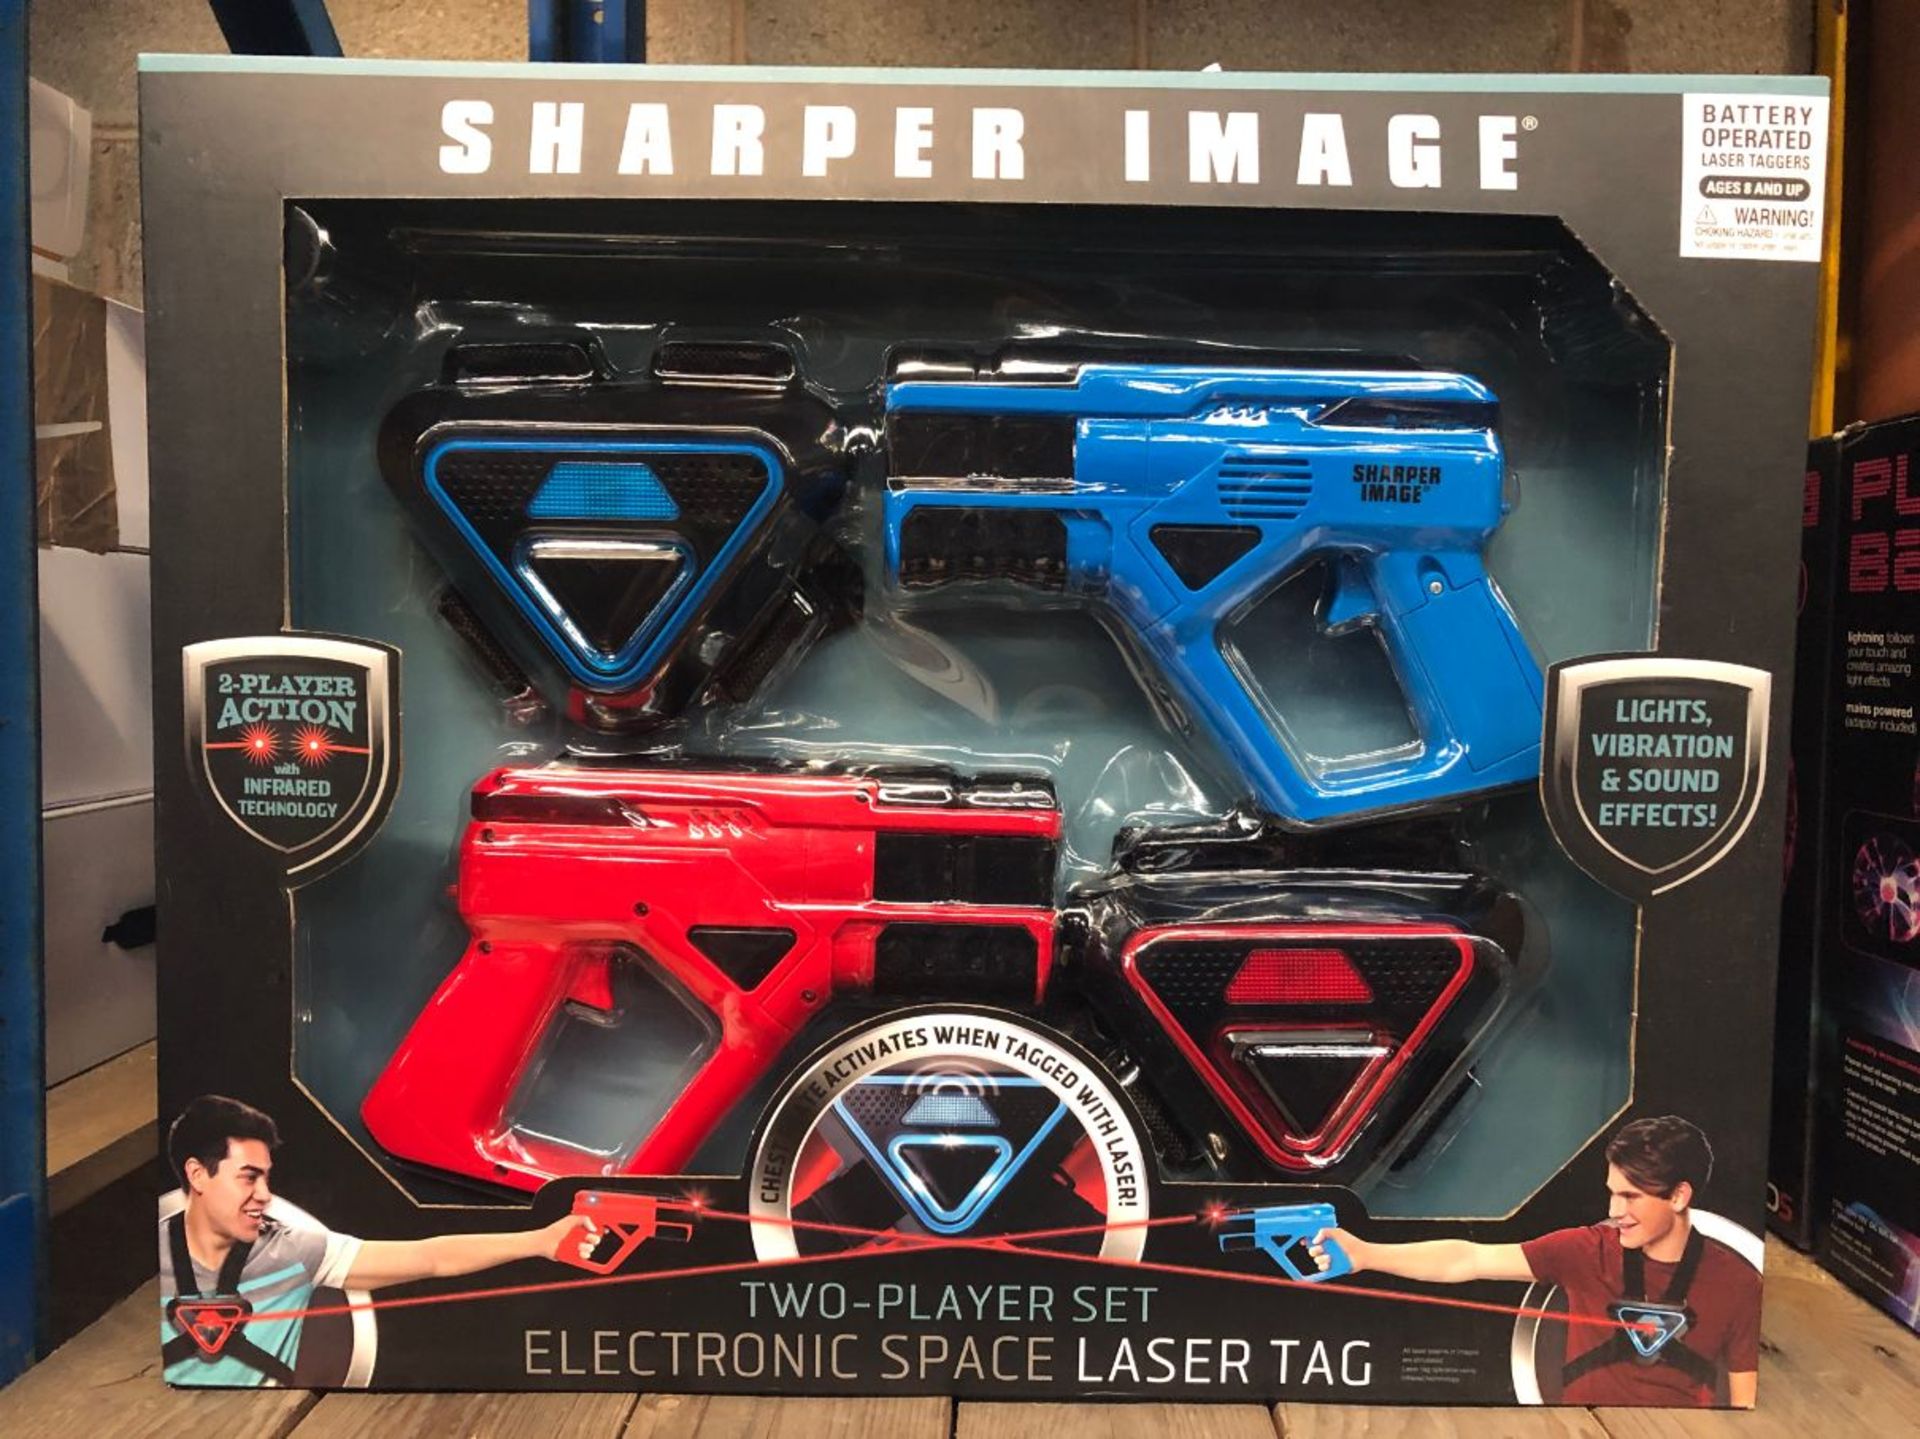 5 X SHARPER IMAGE ELECTRONIC LASER TAG SETS / COMBINDED RRP £175.00 / UNTESTED CUSTOMER RETURNS